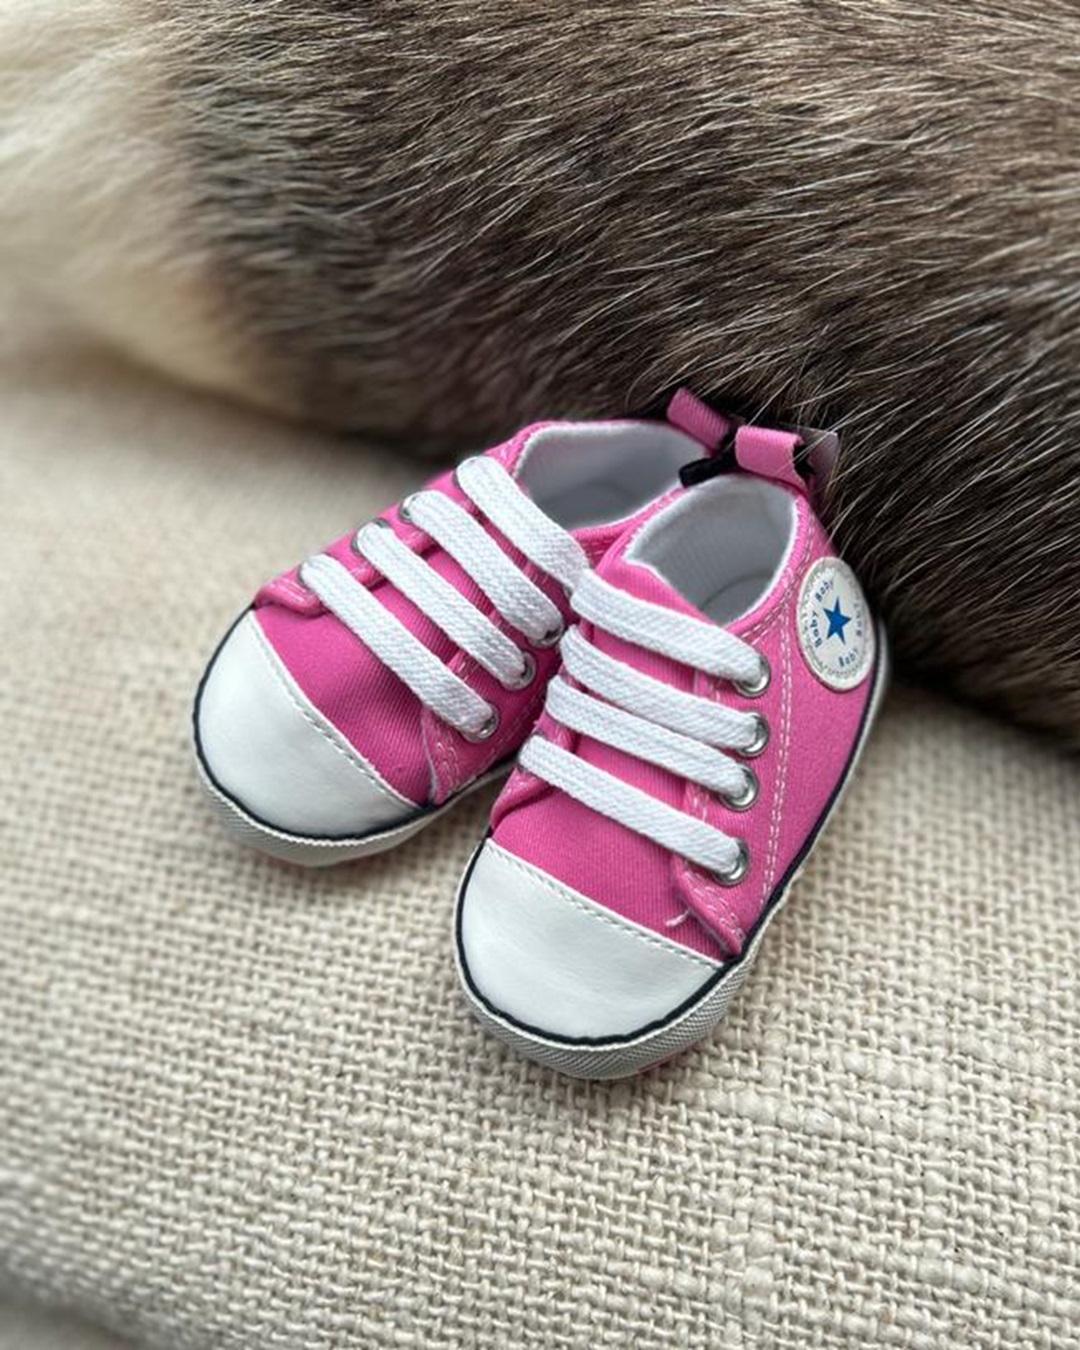 Baby canvas shoes pink with white laces